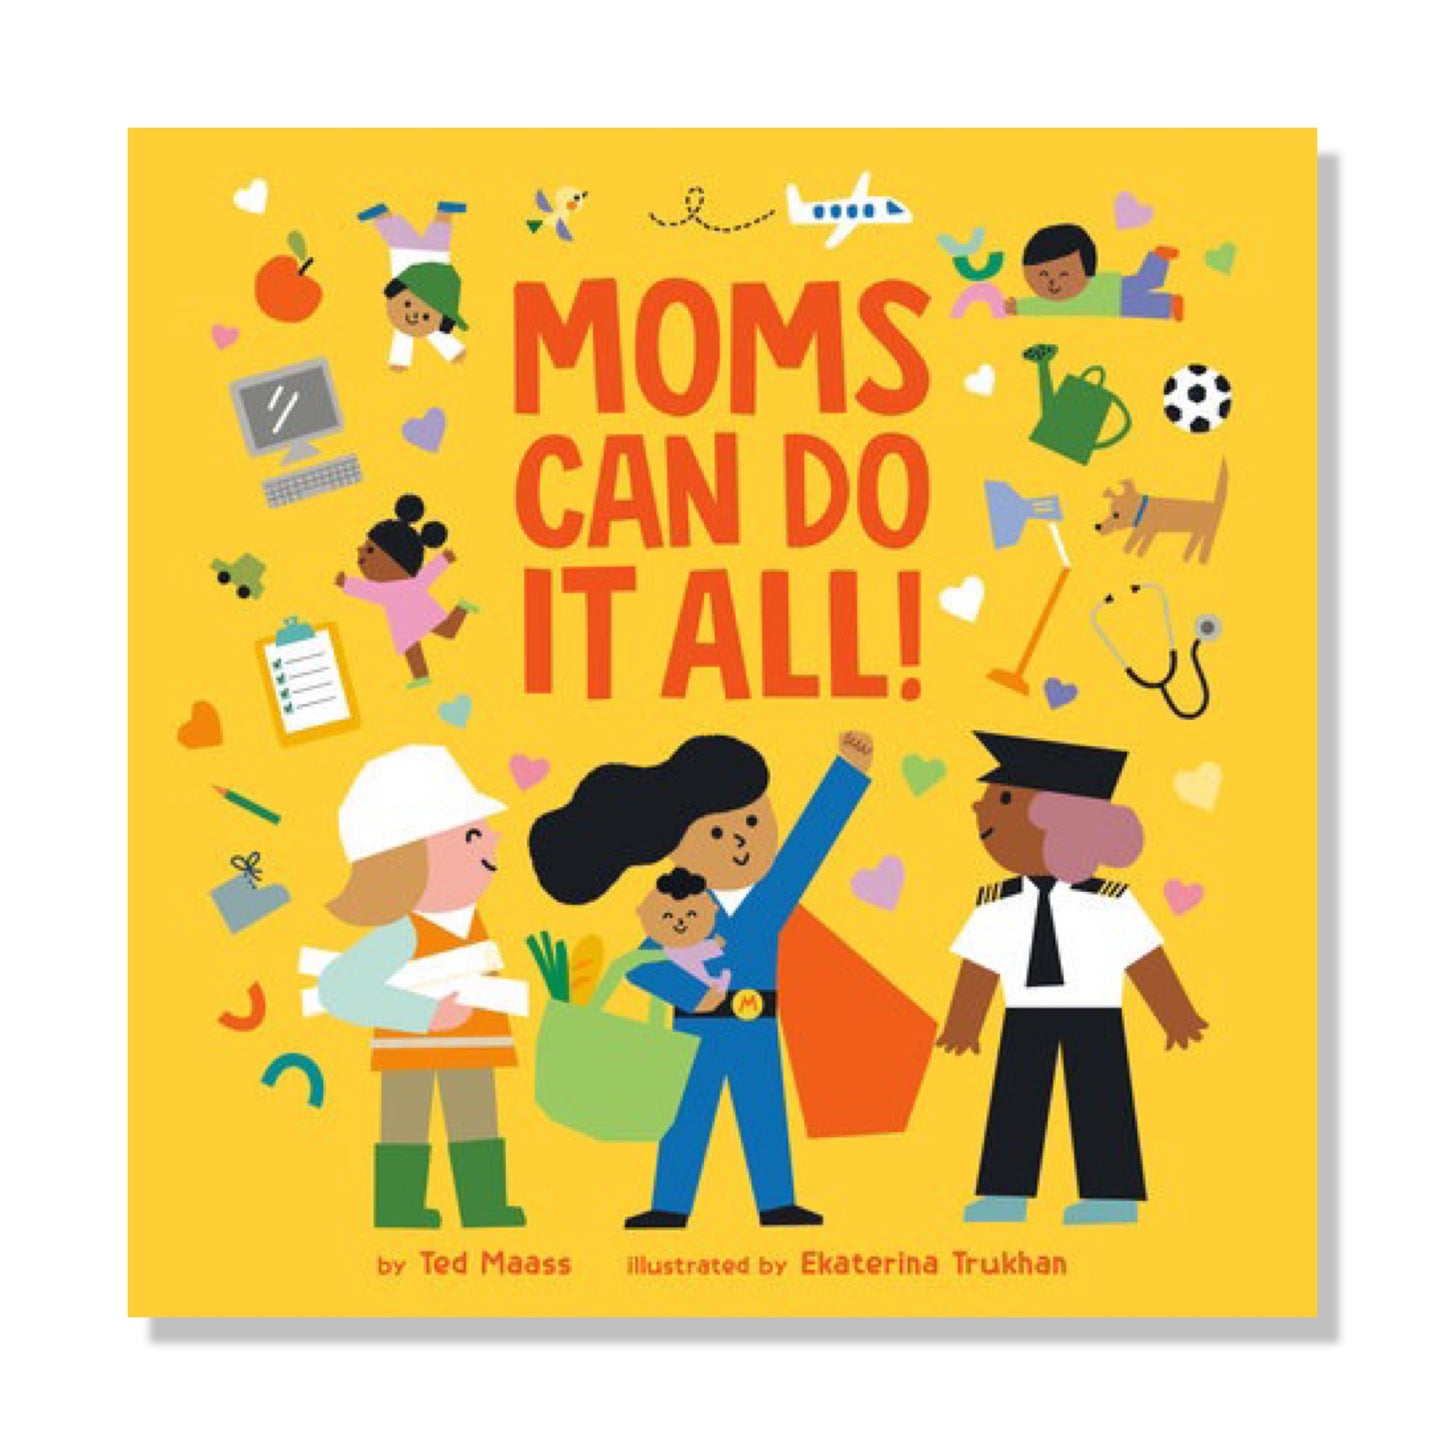 Moms Can Do It All!